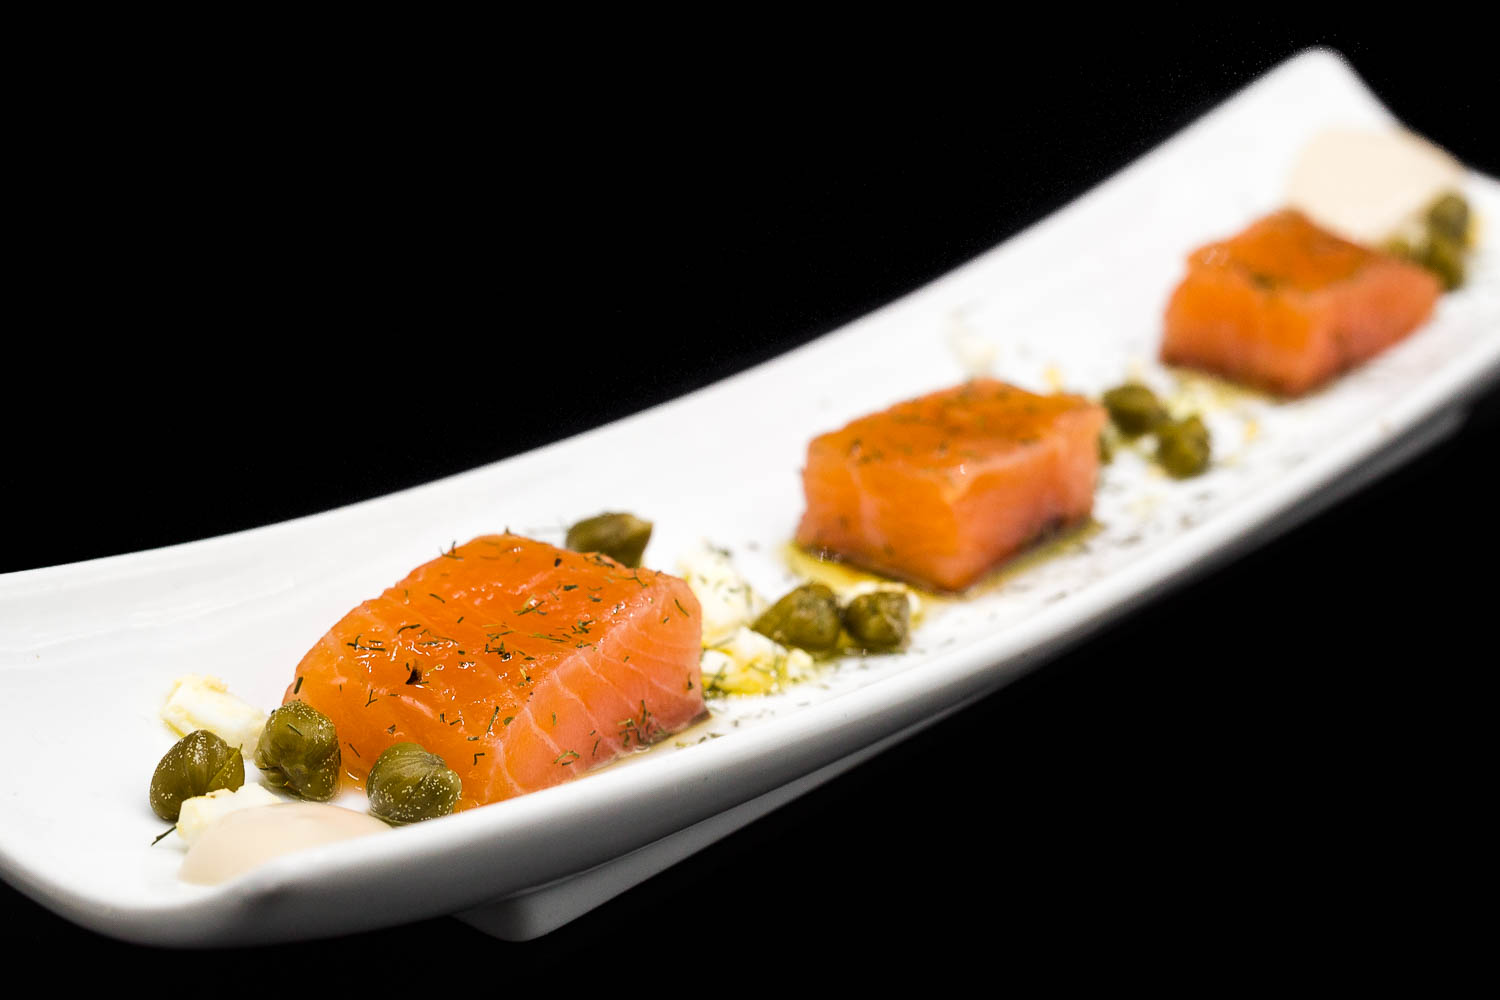 Salmon macerated with mayonnaise